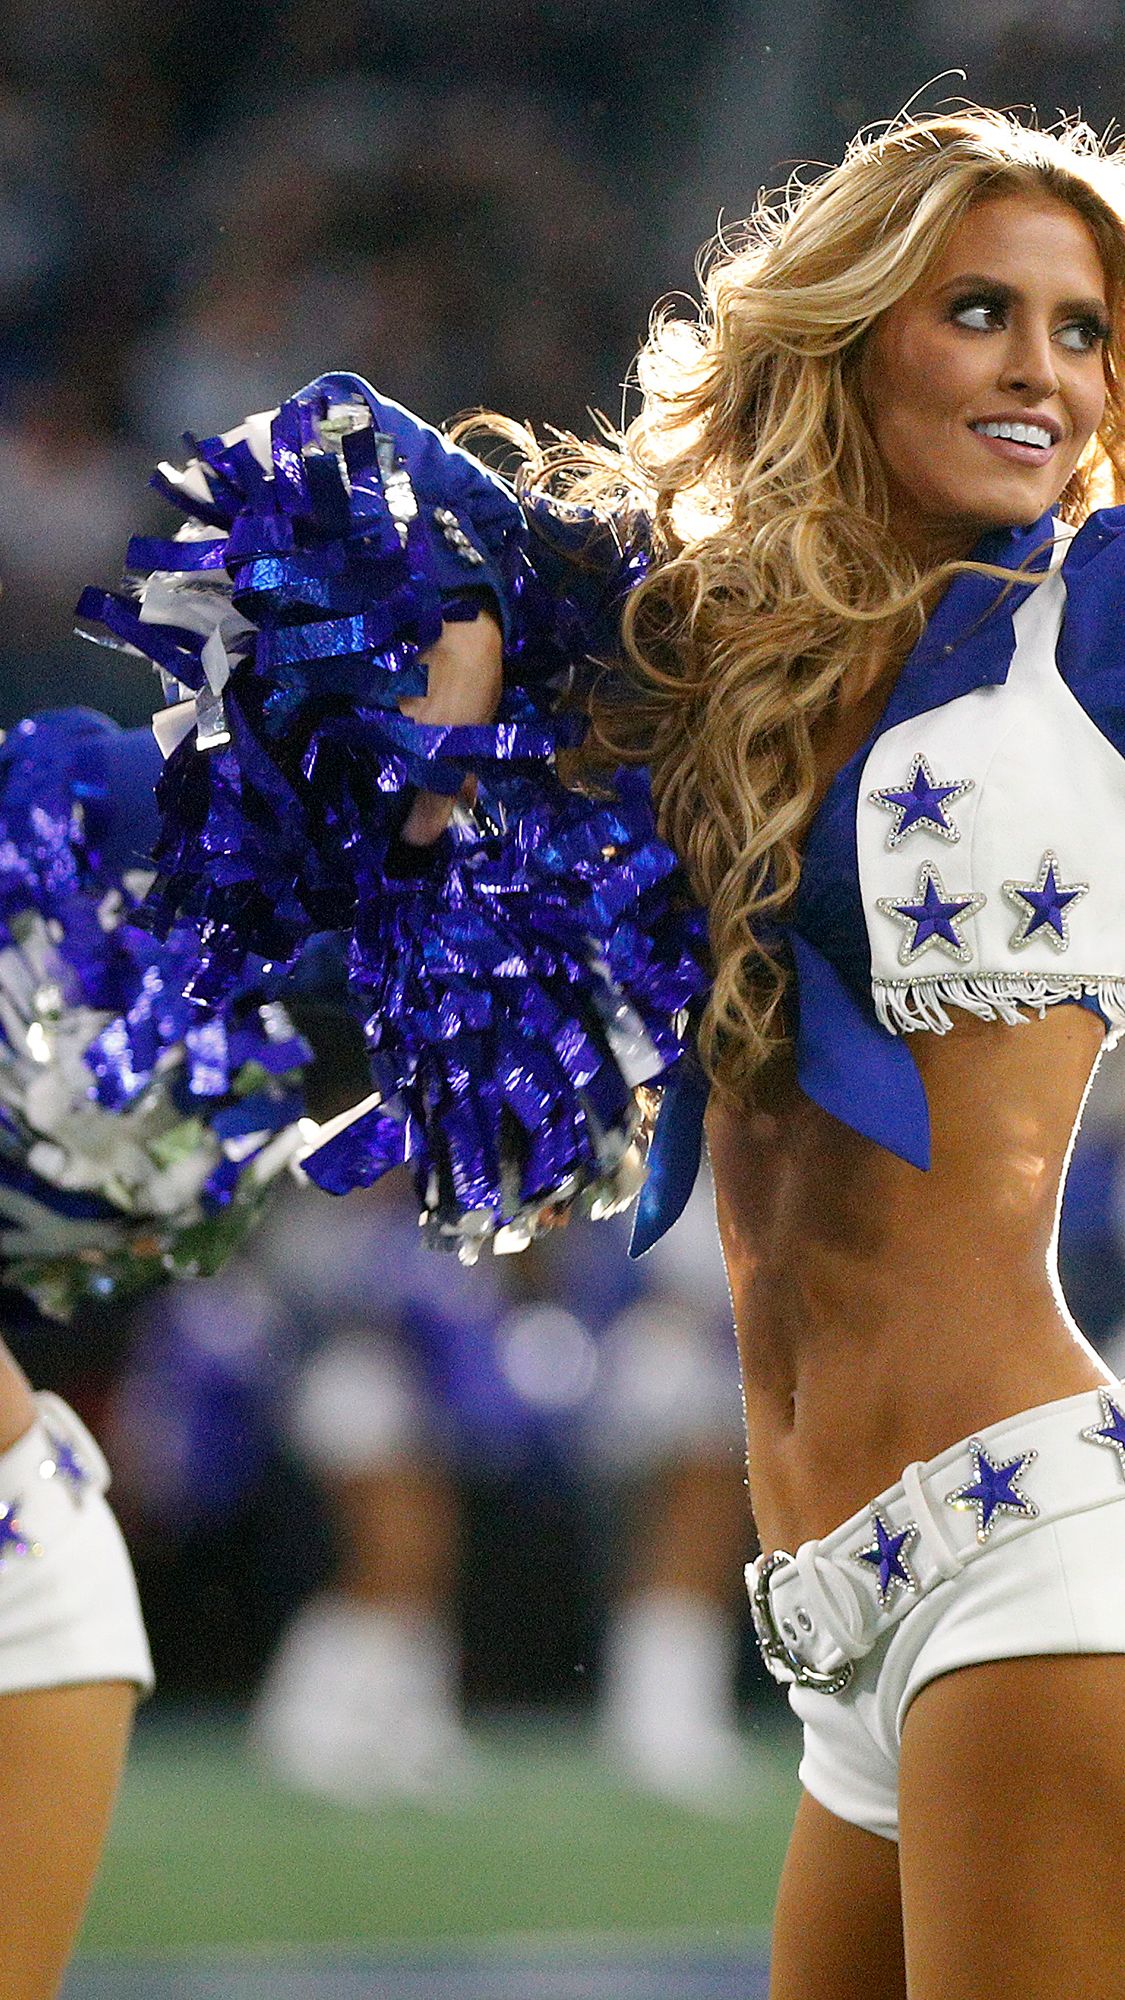 NFL cheer uniforms have been scrutinized since the 1970s, but critics might  be missing the point | CNN